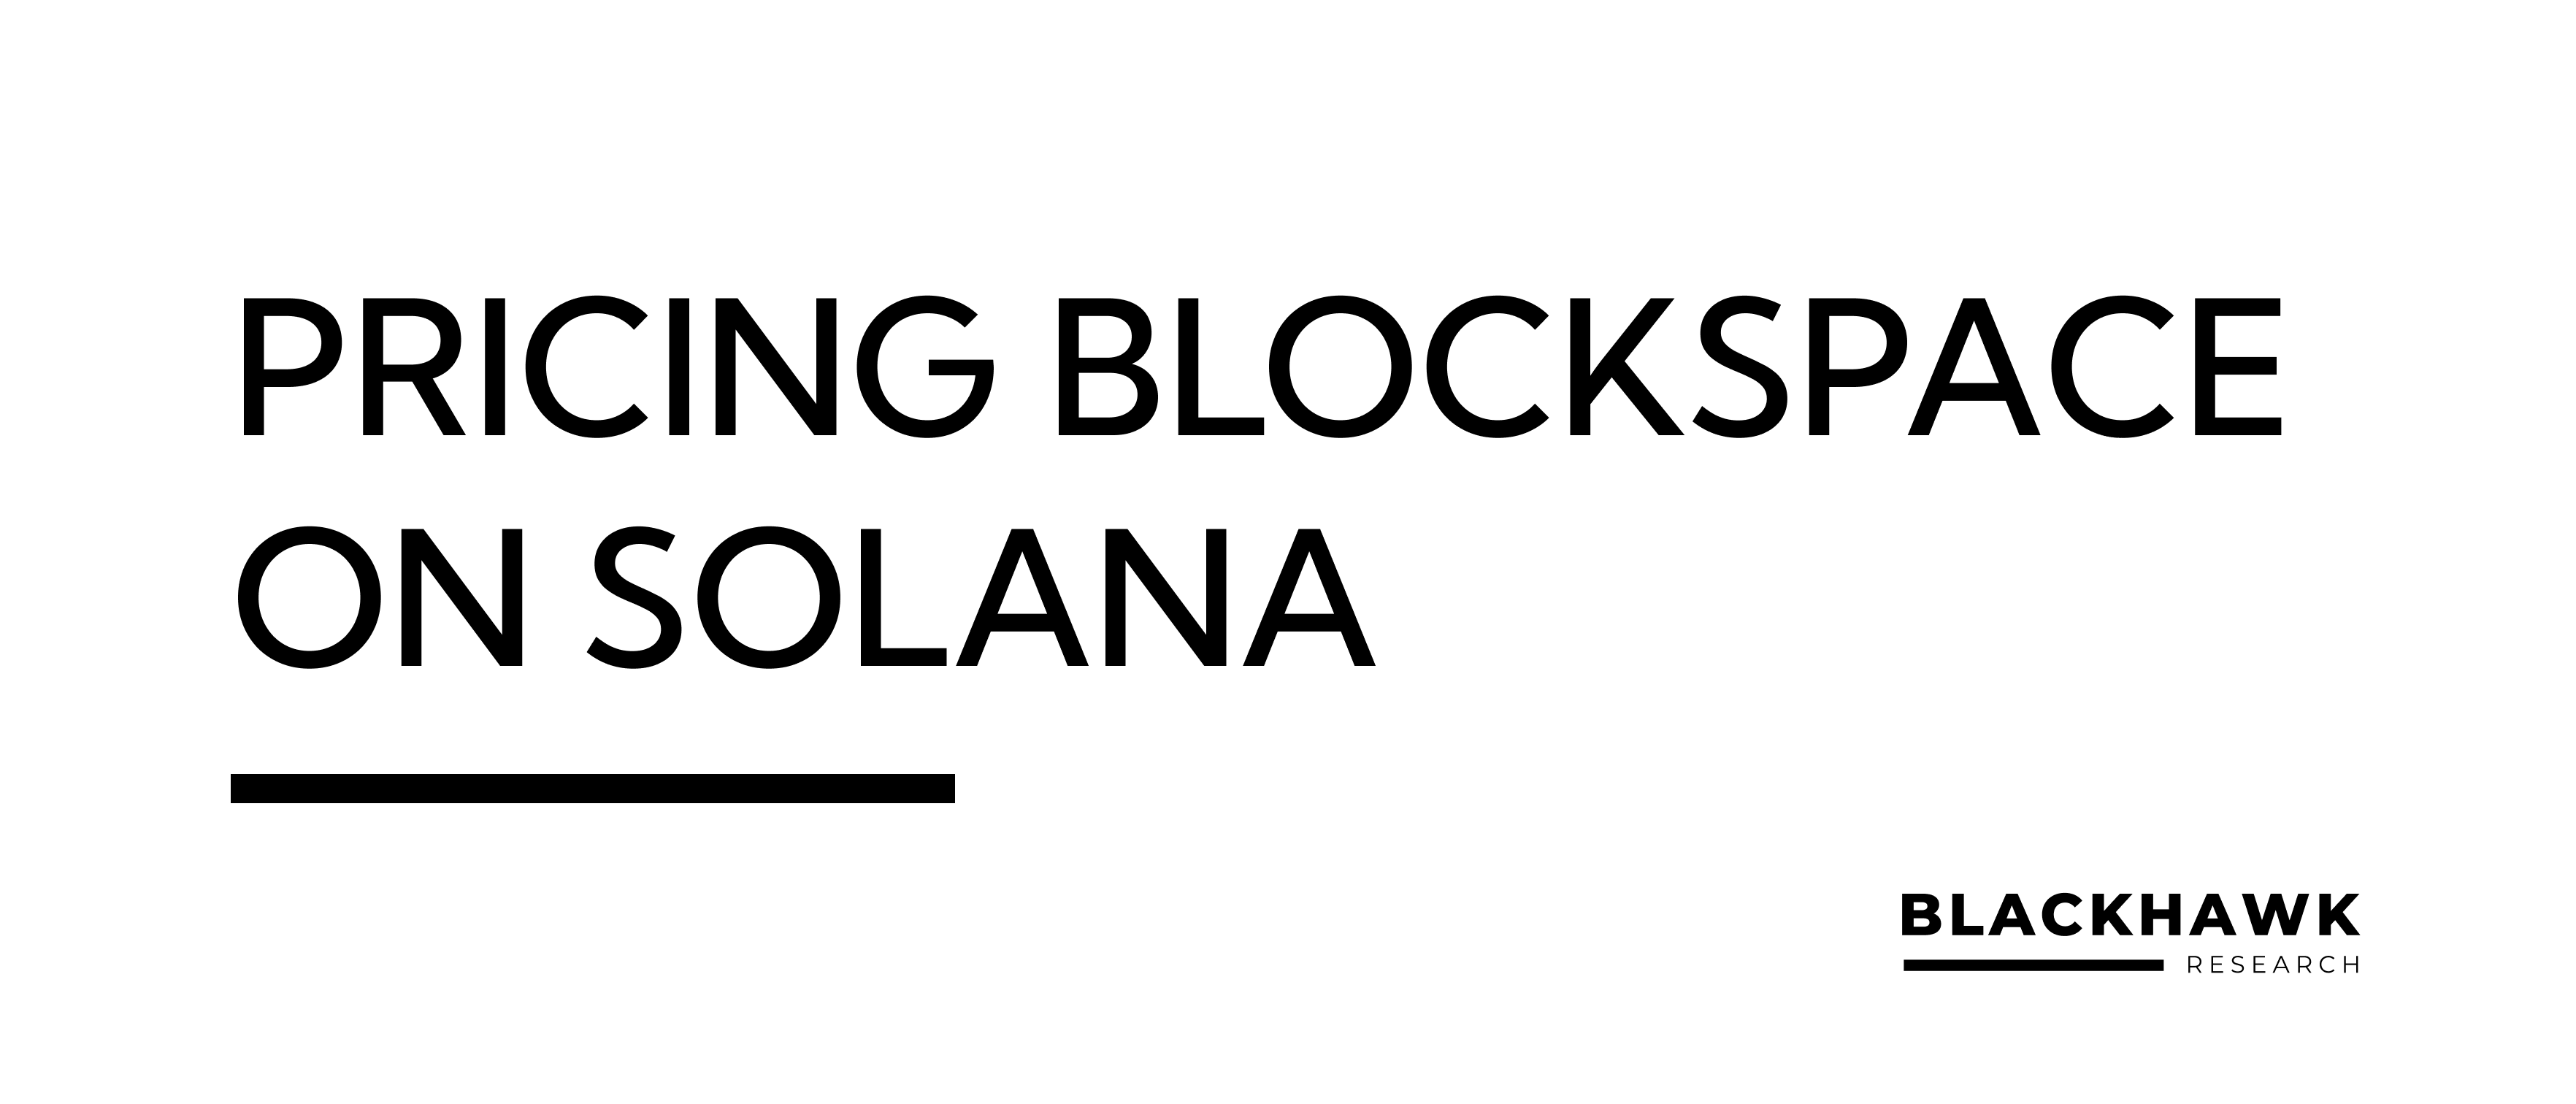 Cover Image for Pricing Blockspace on Solana